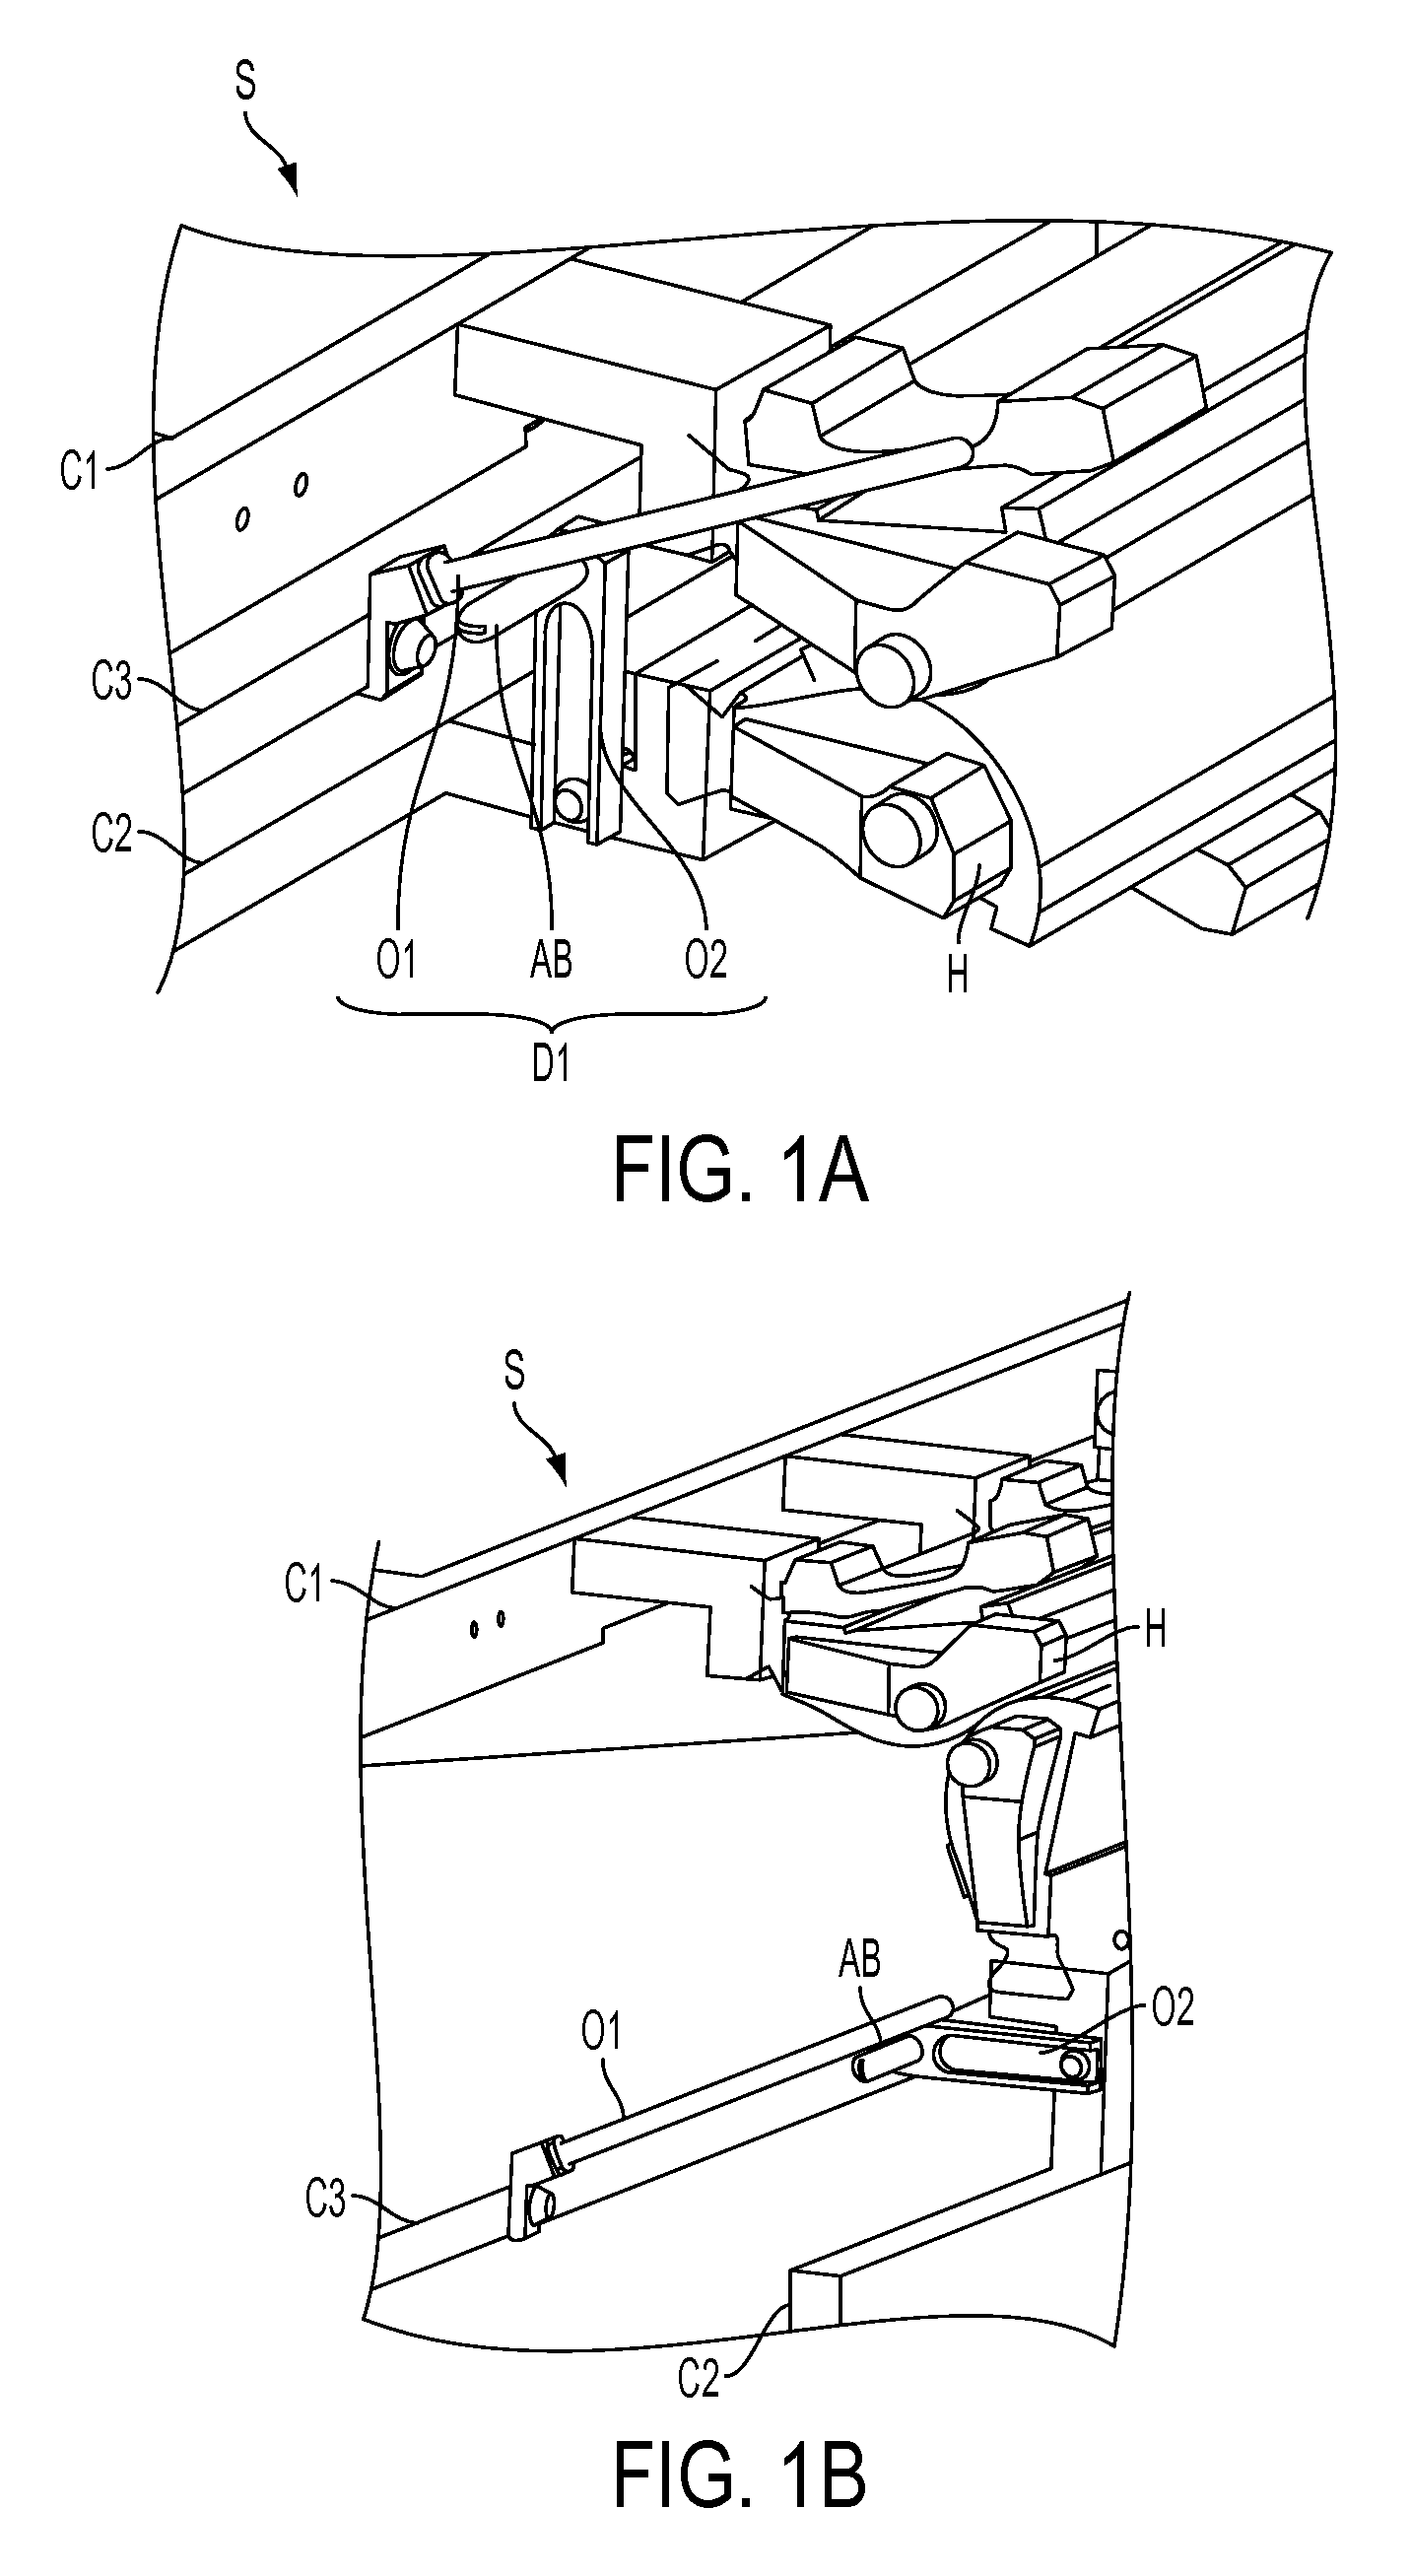 Sequencing device for deploying a structure as a function of the kinematics of one mobile body thereof